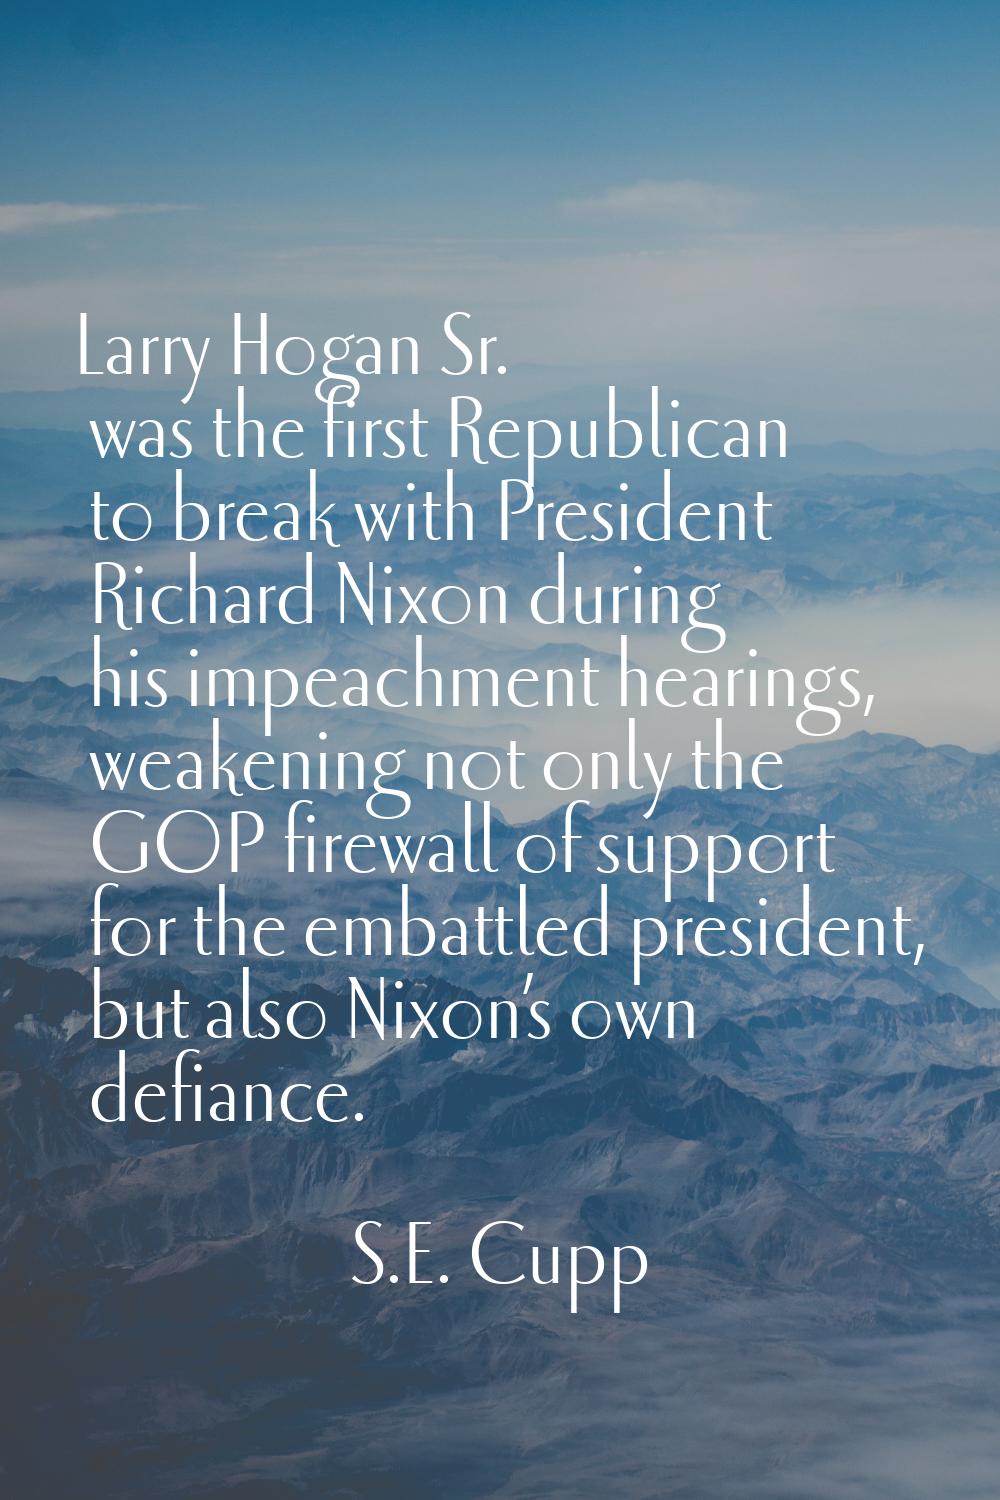 Larry Hogan Sr. was the first Republican to break with President Richard Nixon during his impeachme